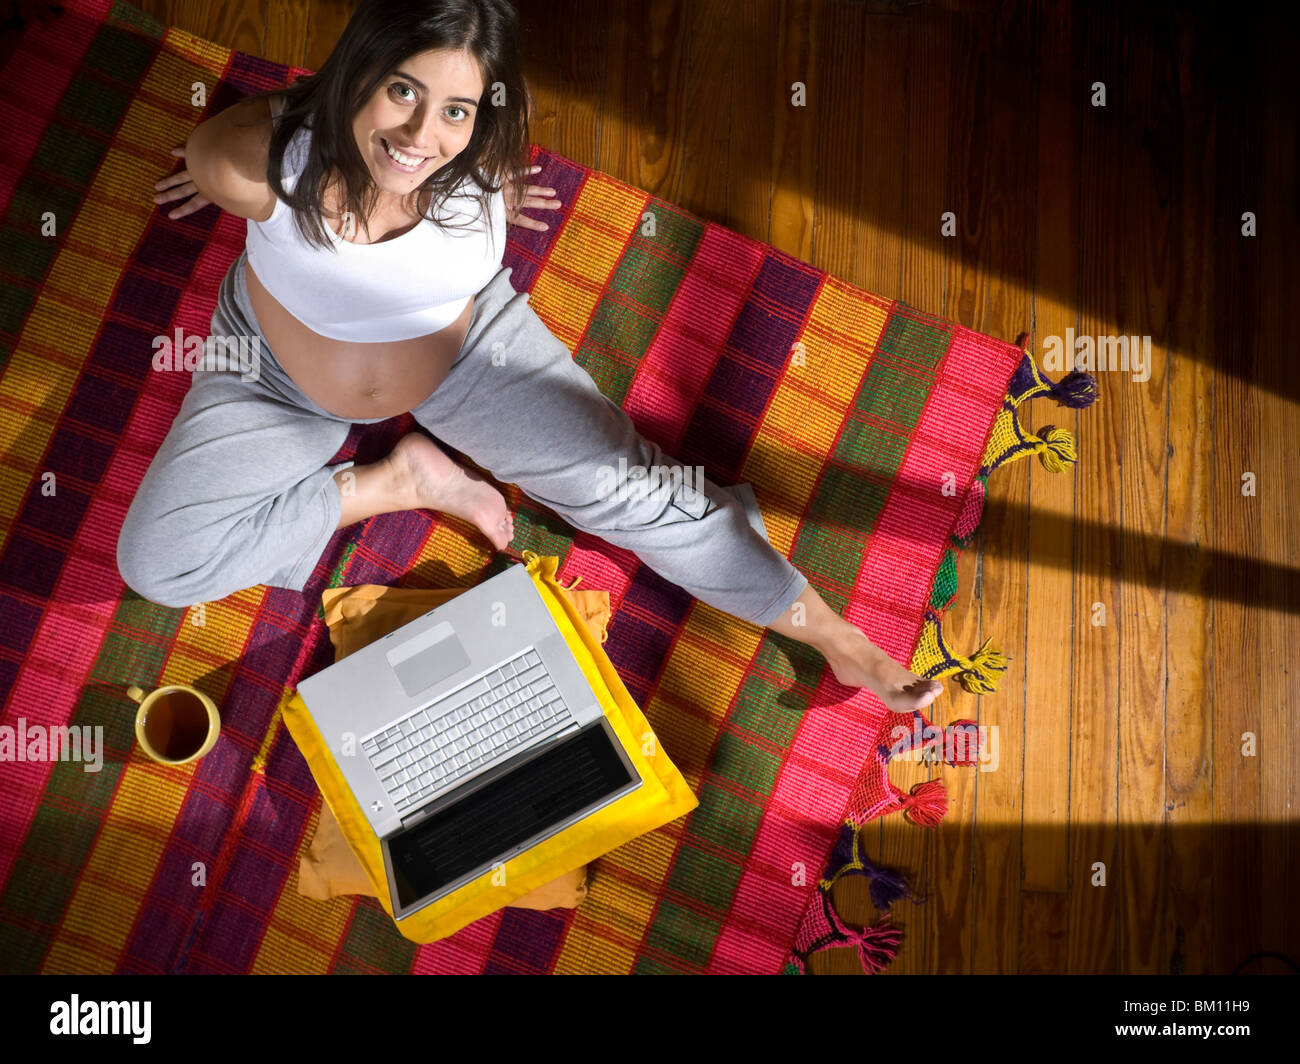 Top view of a young pregnant woman seated on a colorful rug with a laptop computer and a cup of tea. Stock Photo